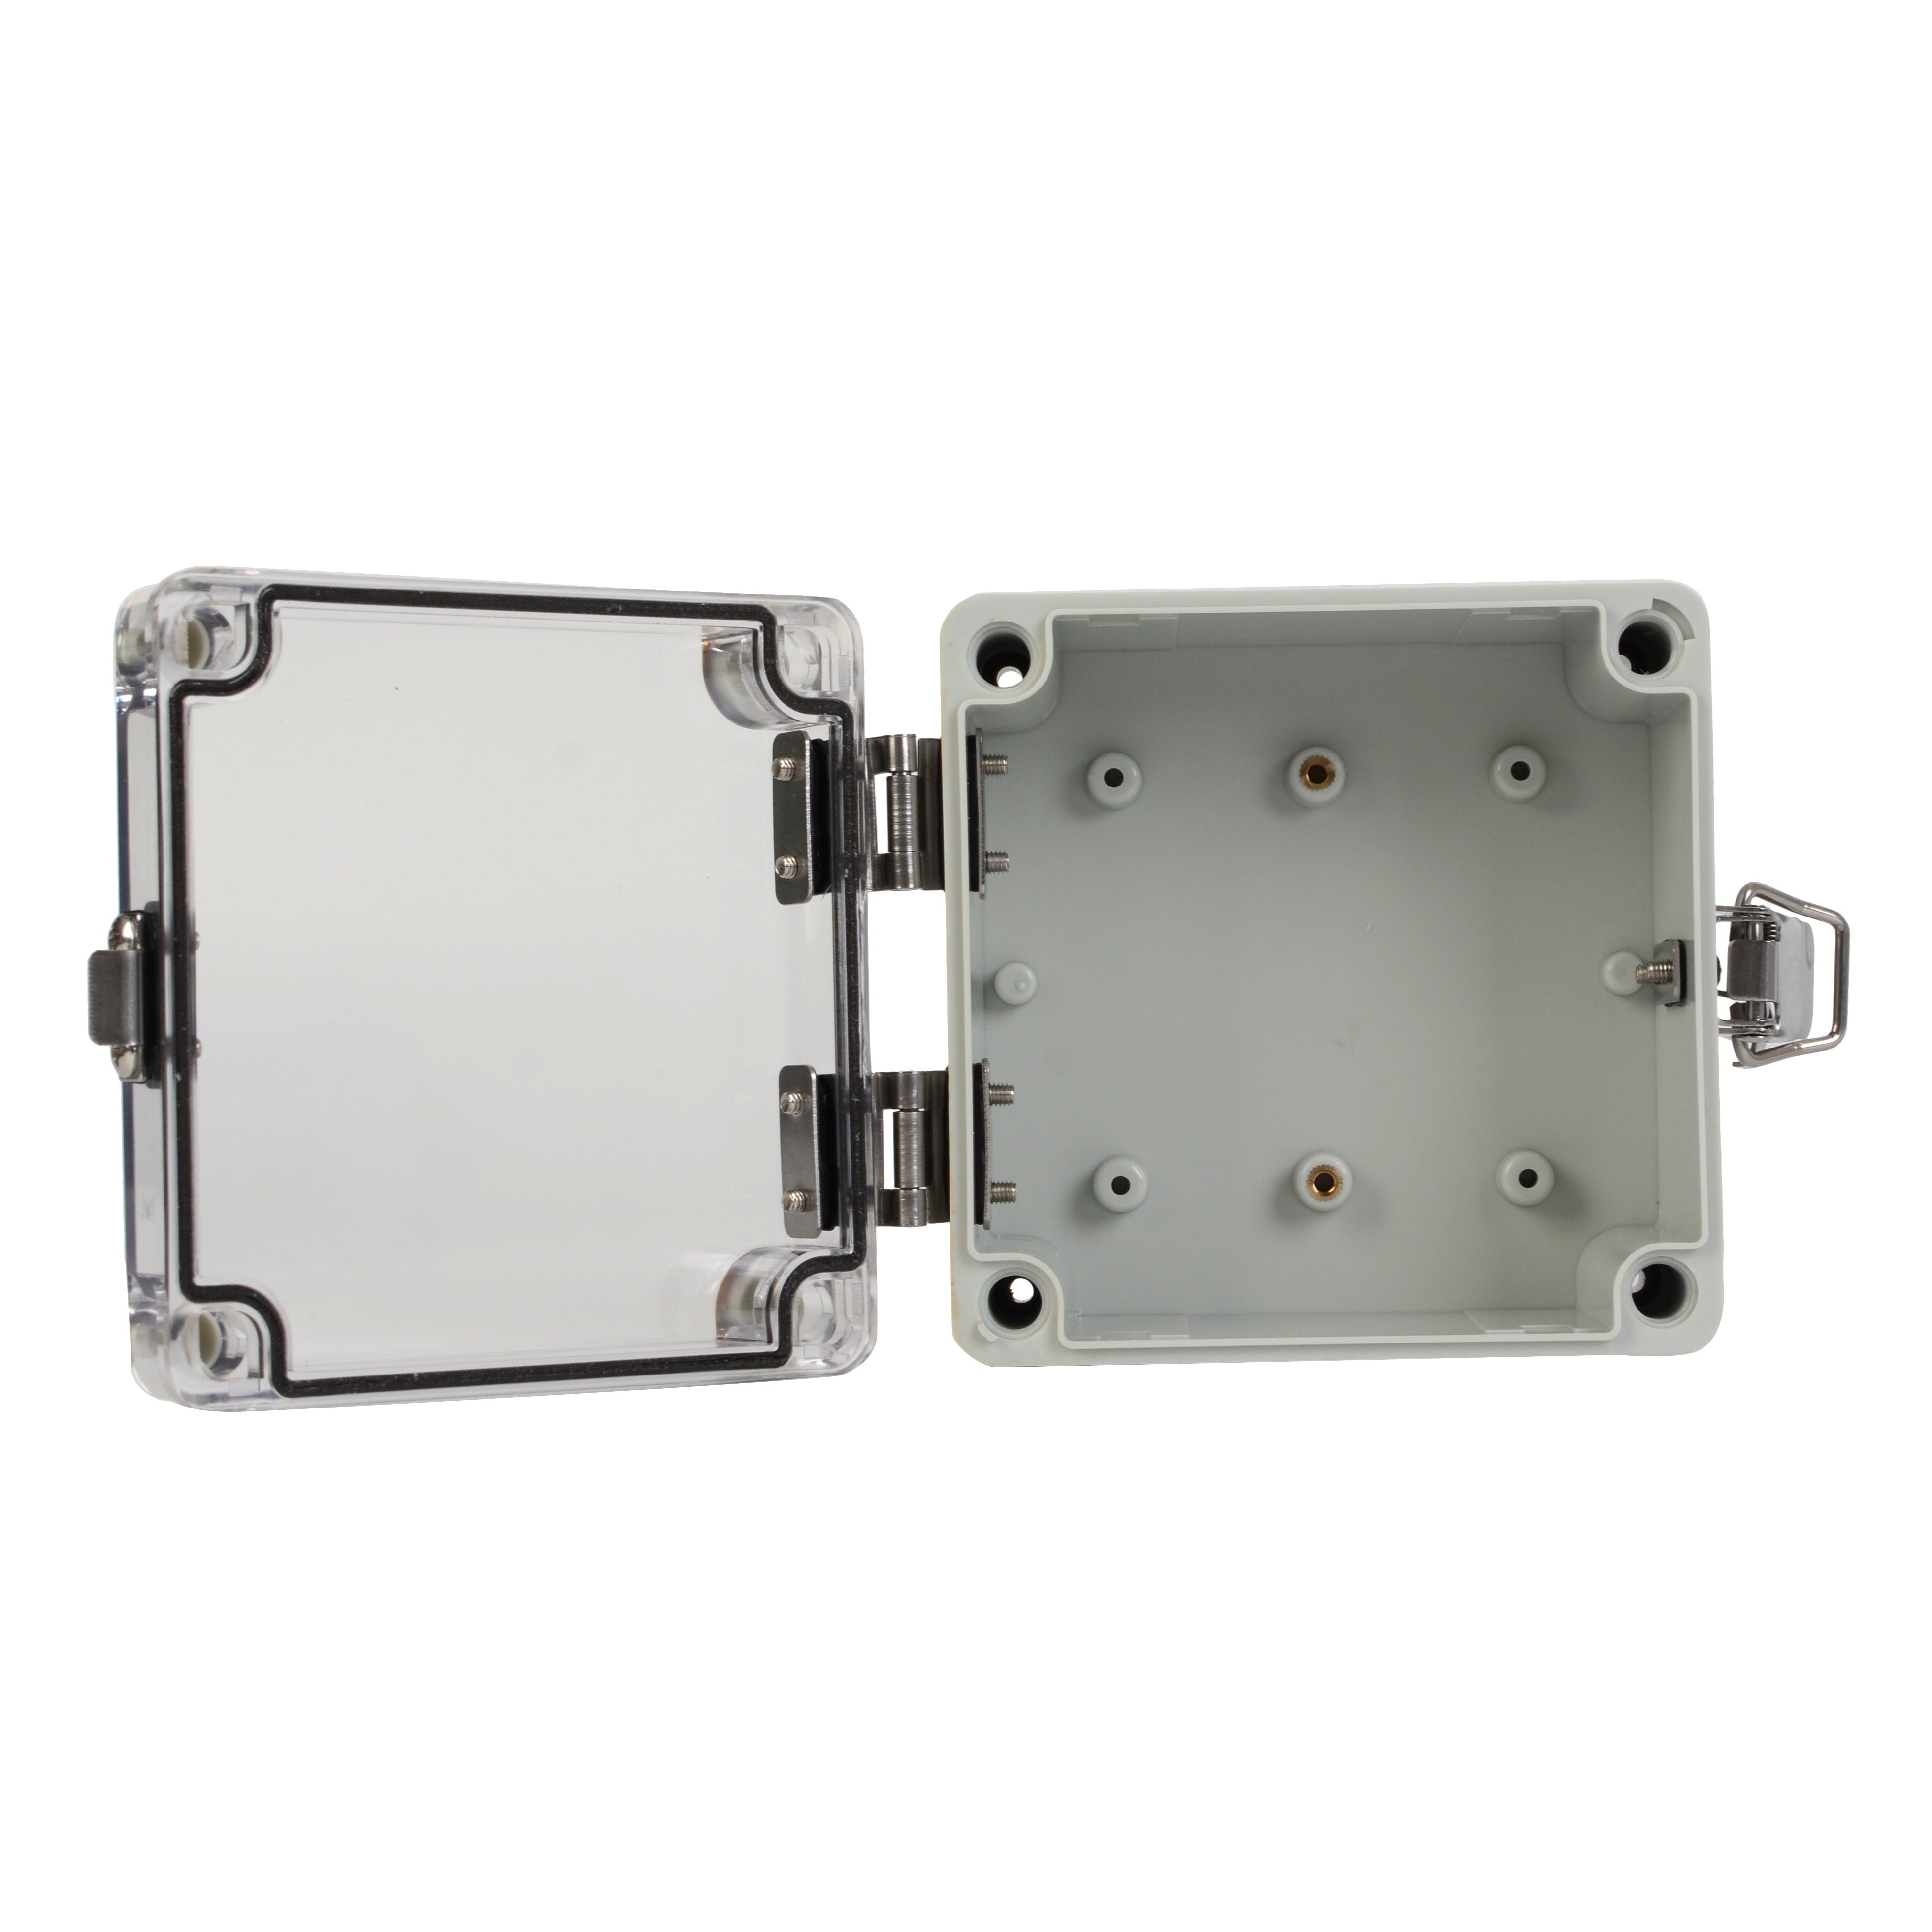 ABS IP66 Clear Lid Junction Box 125 x 125 x 75mm